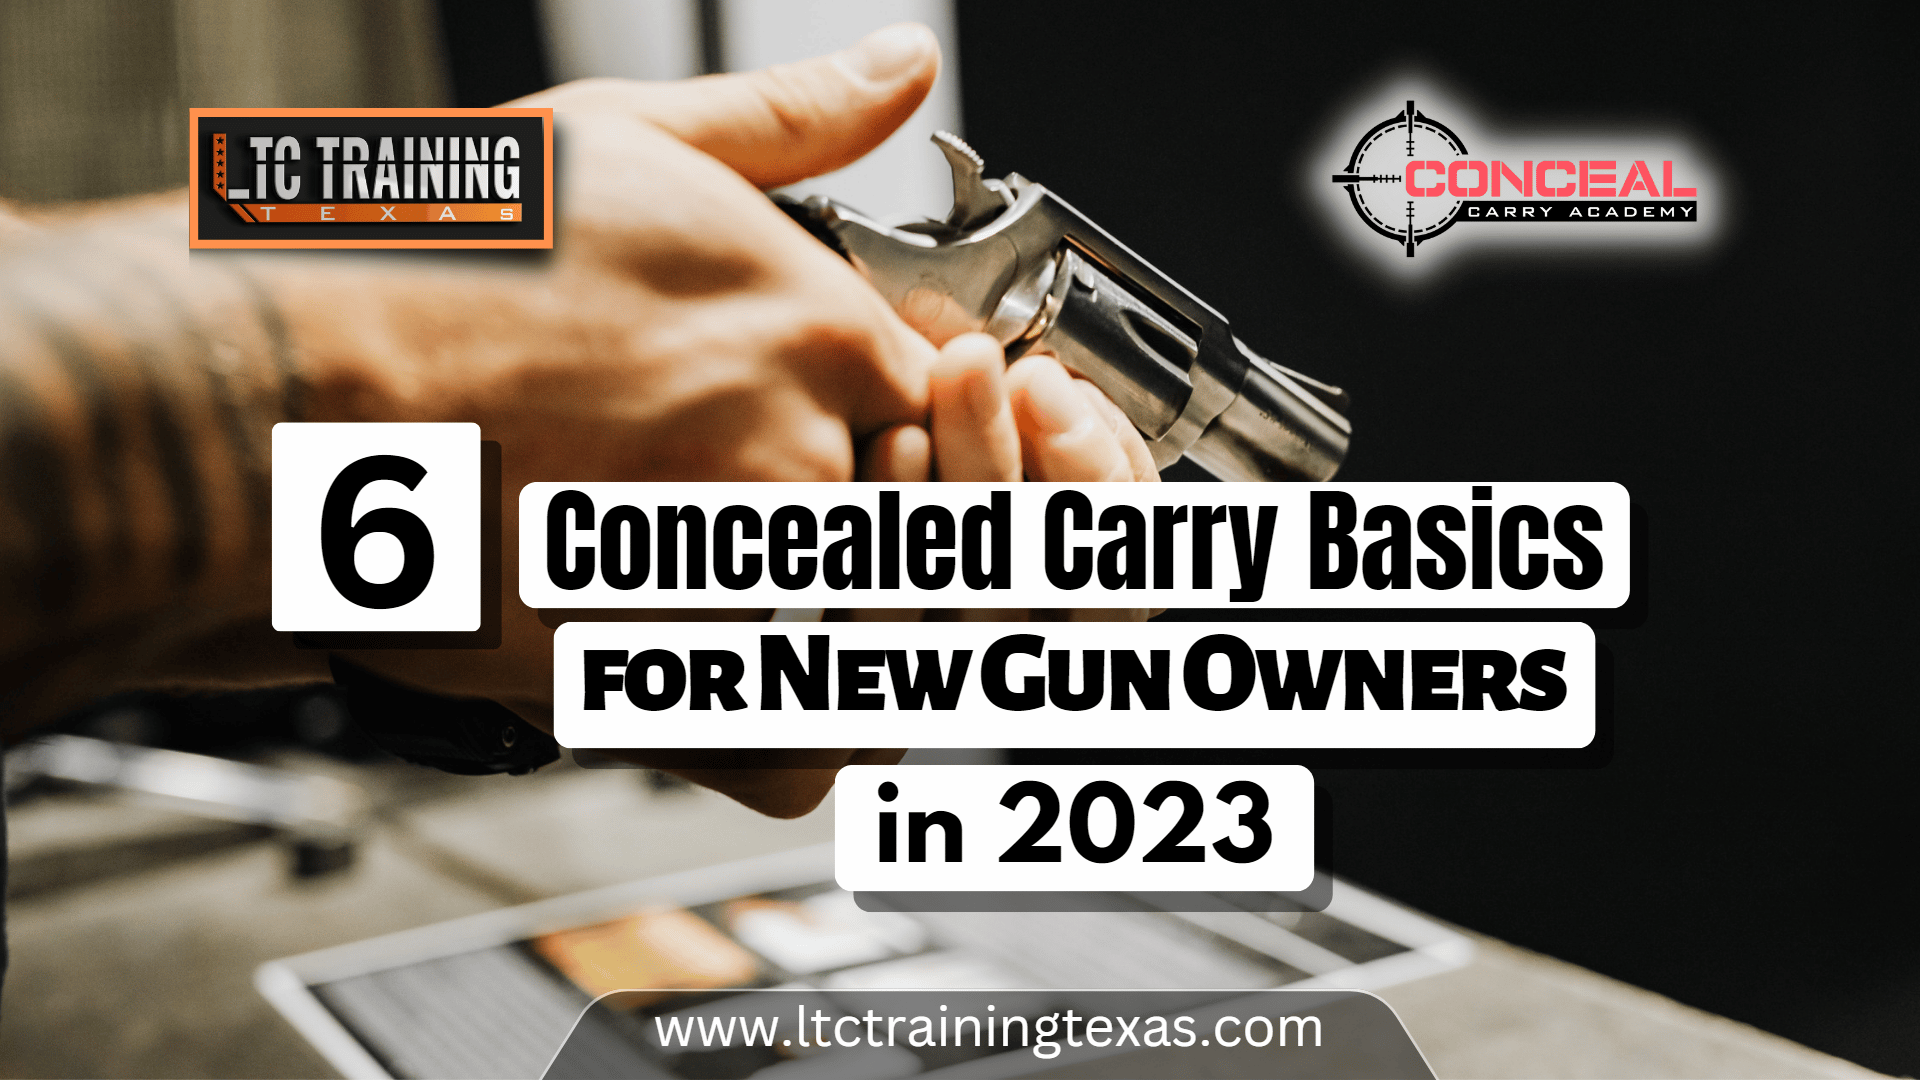 You are currently viewing 6 Concealed Carry Basics for New Gun Owners in 2023